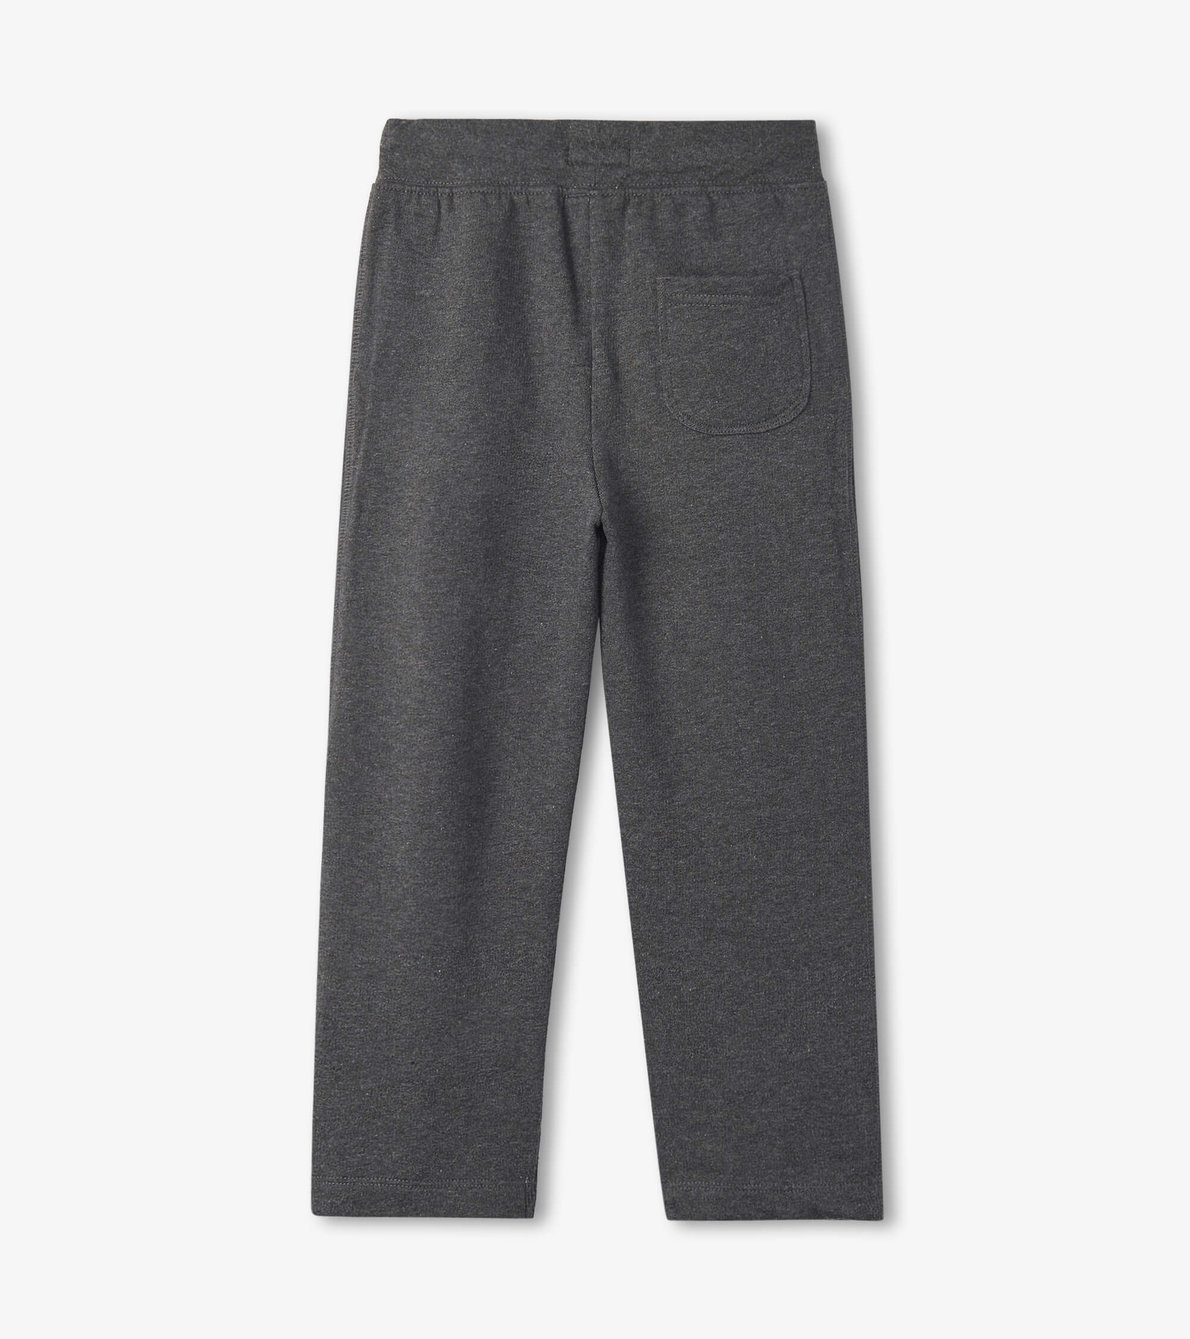 View larger image of Moonshadow Brushed Fleece Track Pants